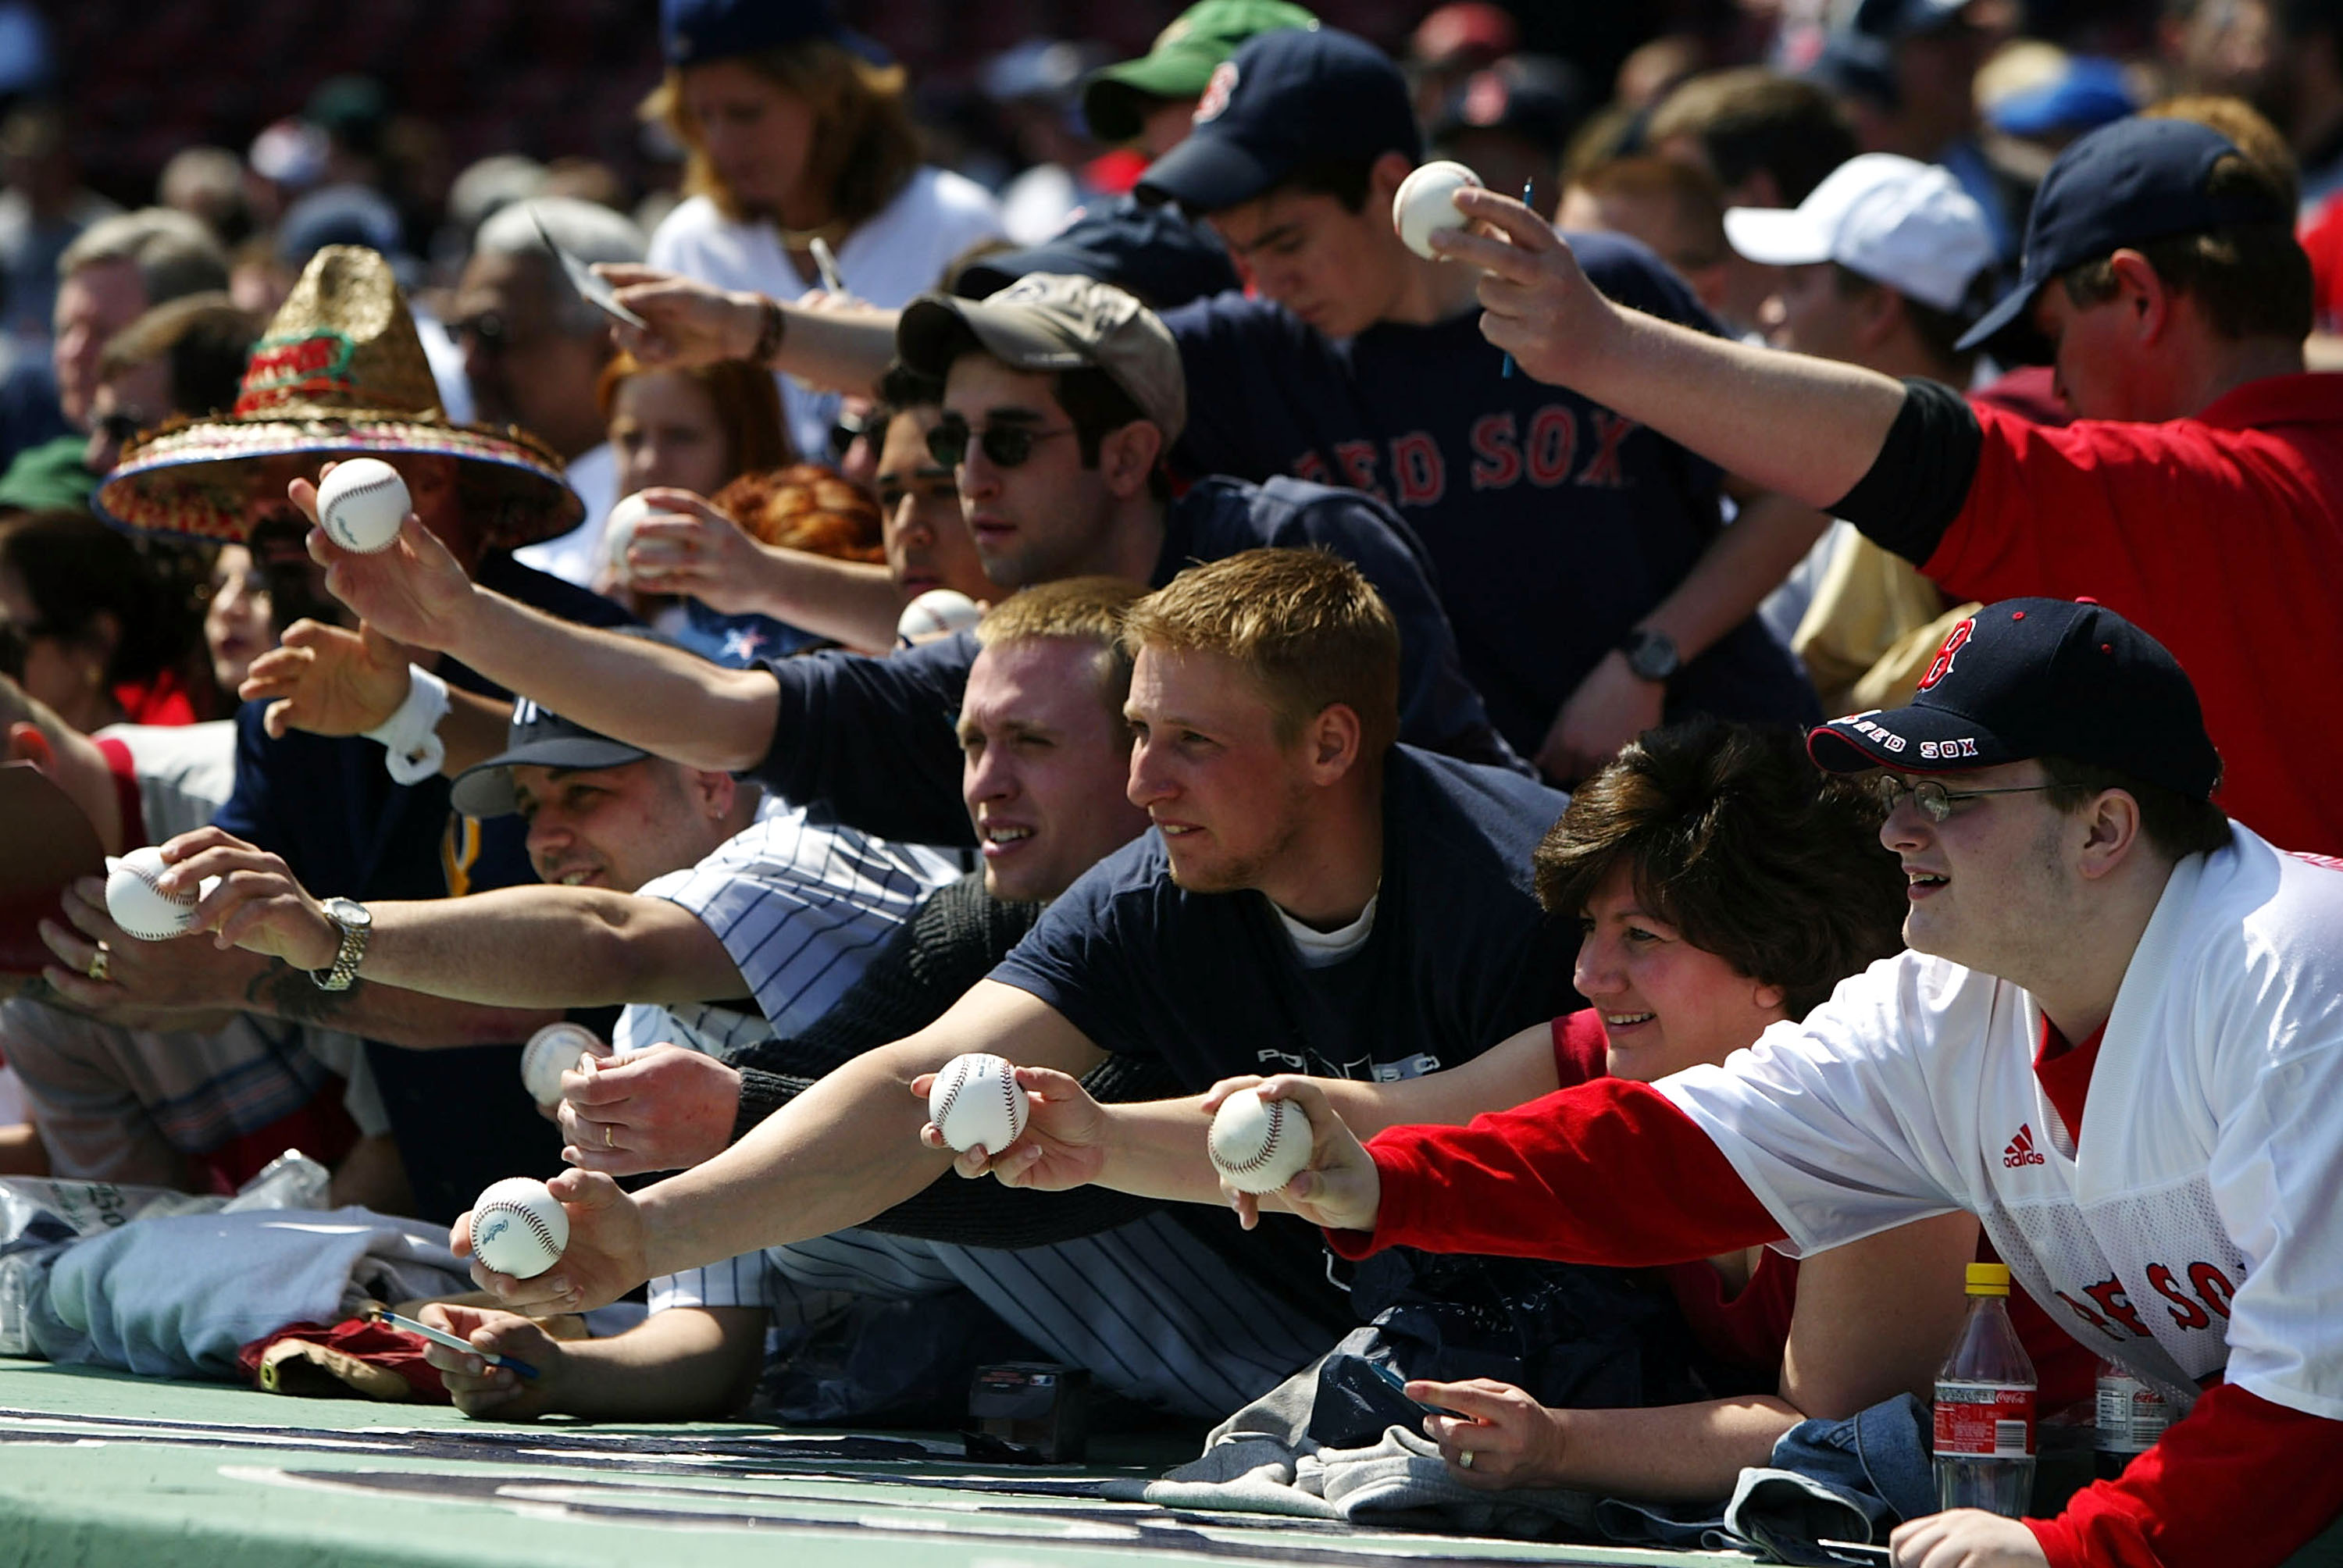 BOSTON - APRIL 17:  Fans hope for autographs before the game between the Boston Red Sox and the New York Yankees on April 17, 2004 at Fenway Park in Boston, Massachusetts. The Red Sox won 5-2.  (Photo by Ezra Shaw/Getty Images)